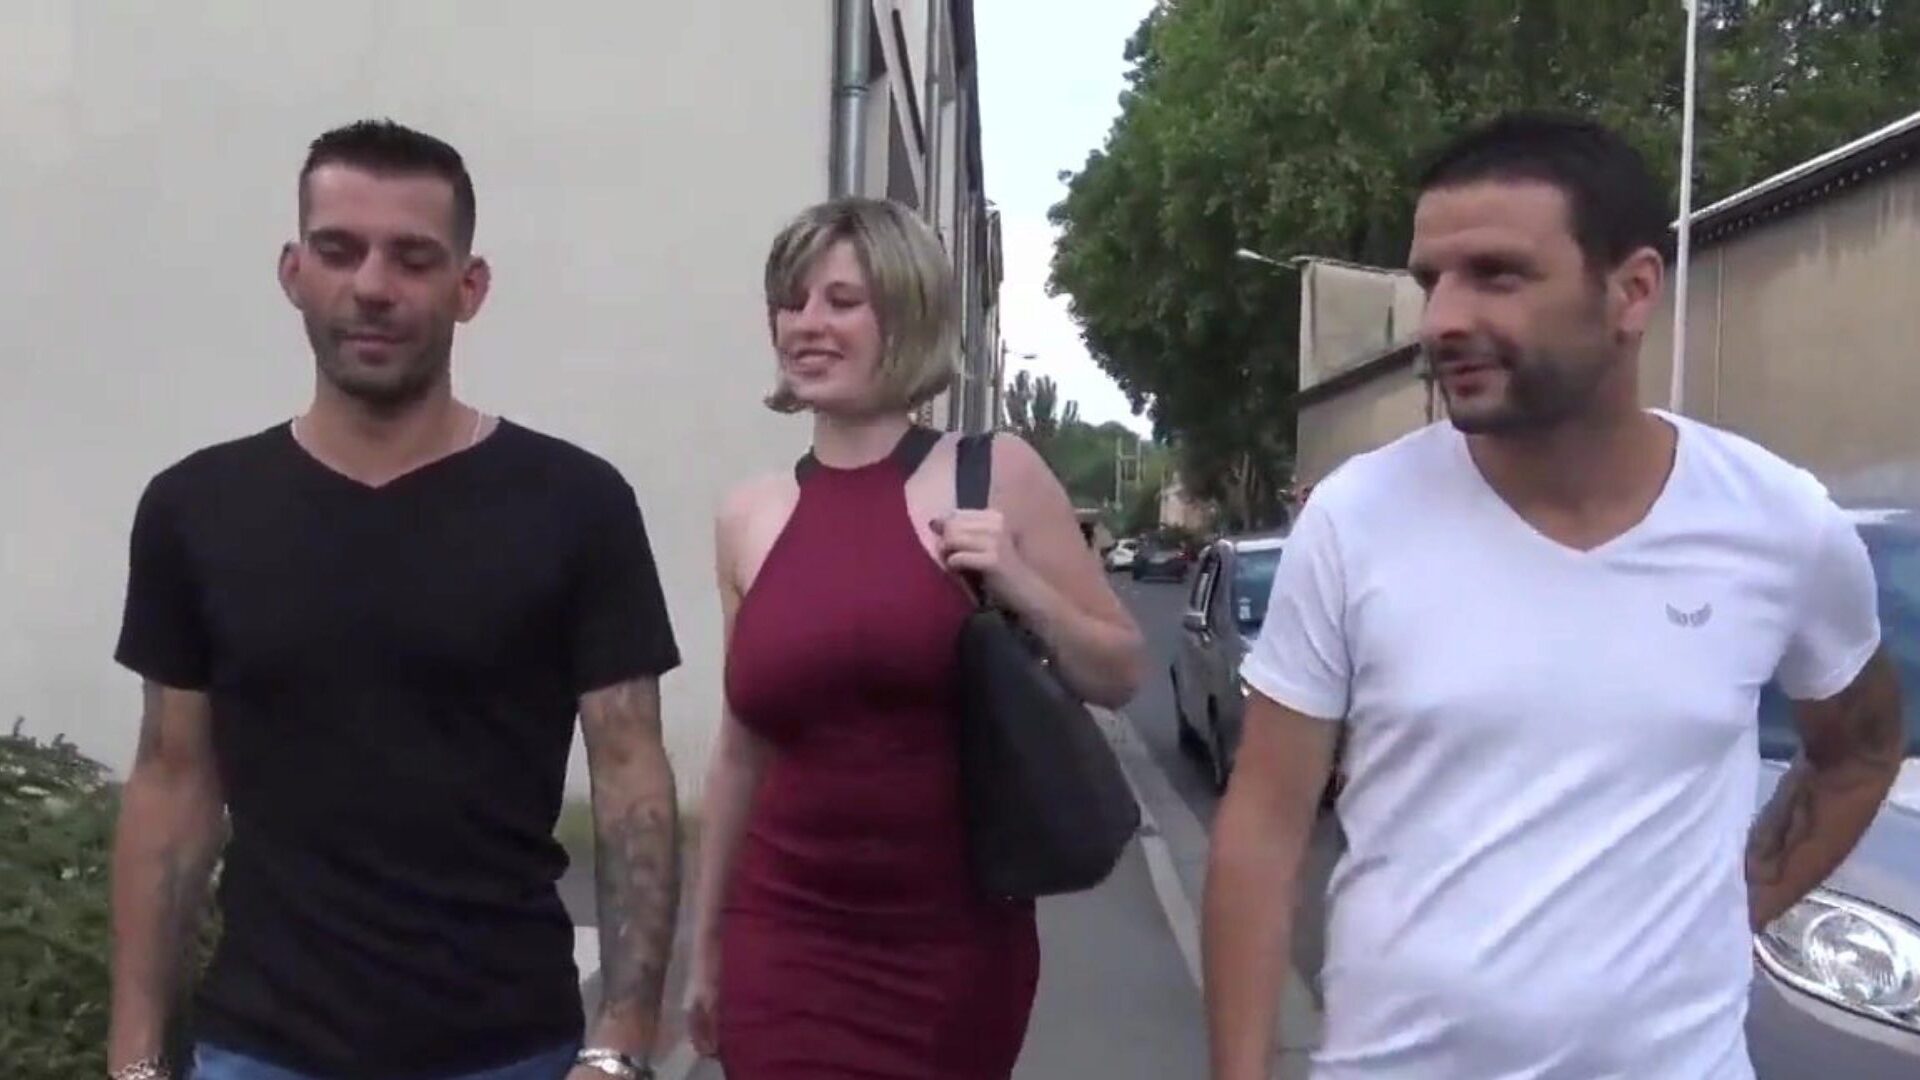 Busty French Slut with Two Men in a Mmf, Porn c1: xHamster Watch Busty French Slut with Two Men in a Mmf video on xHamster, the best HD orgy tube website with tons of free Blowjob Xnx Mobile & Mp3 Mobile porn videos